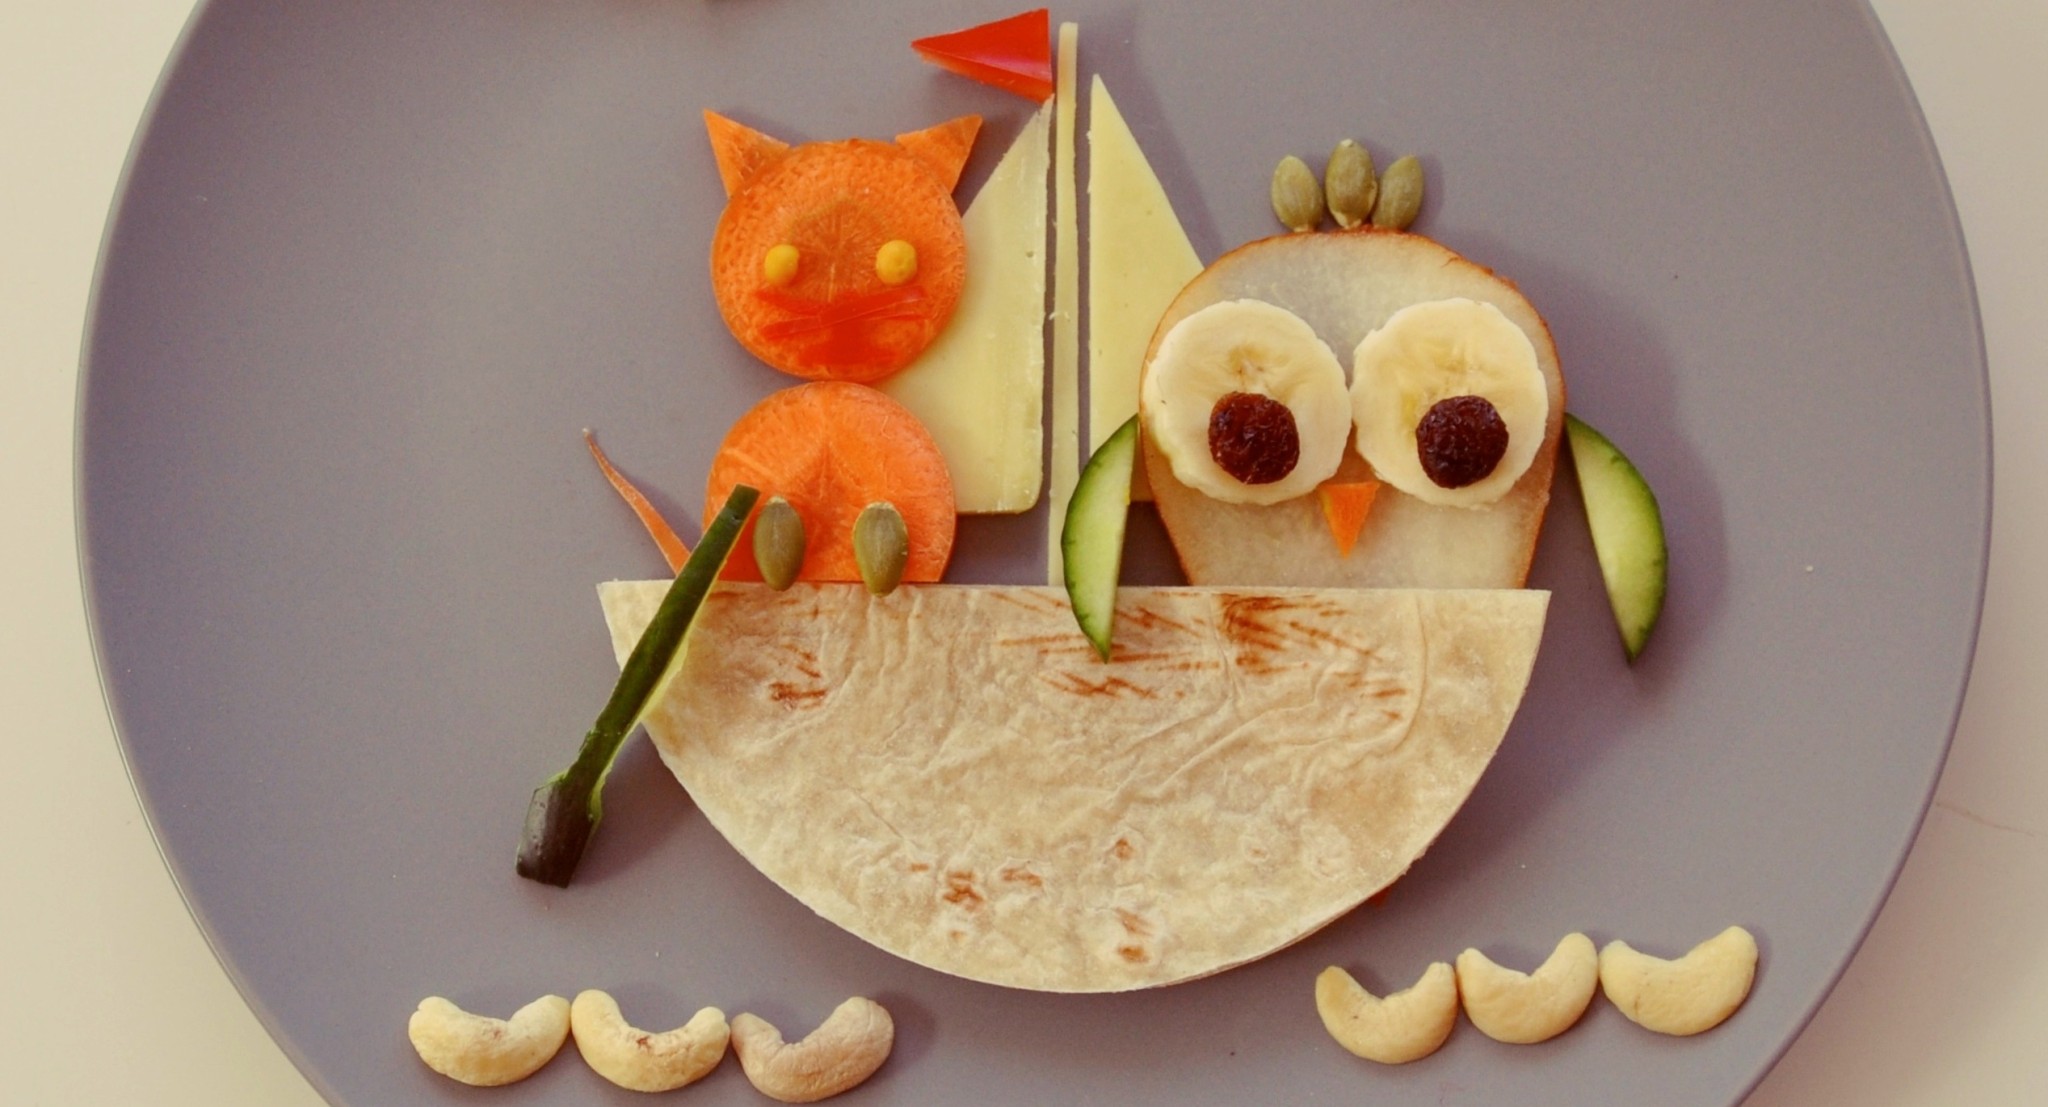 PLAY WITH YOUR FOOD